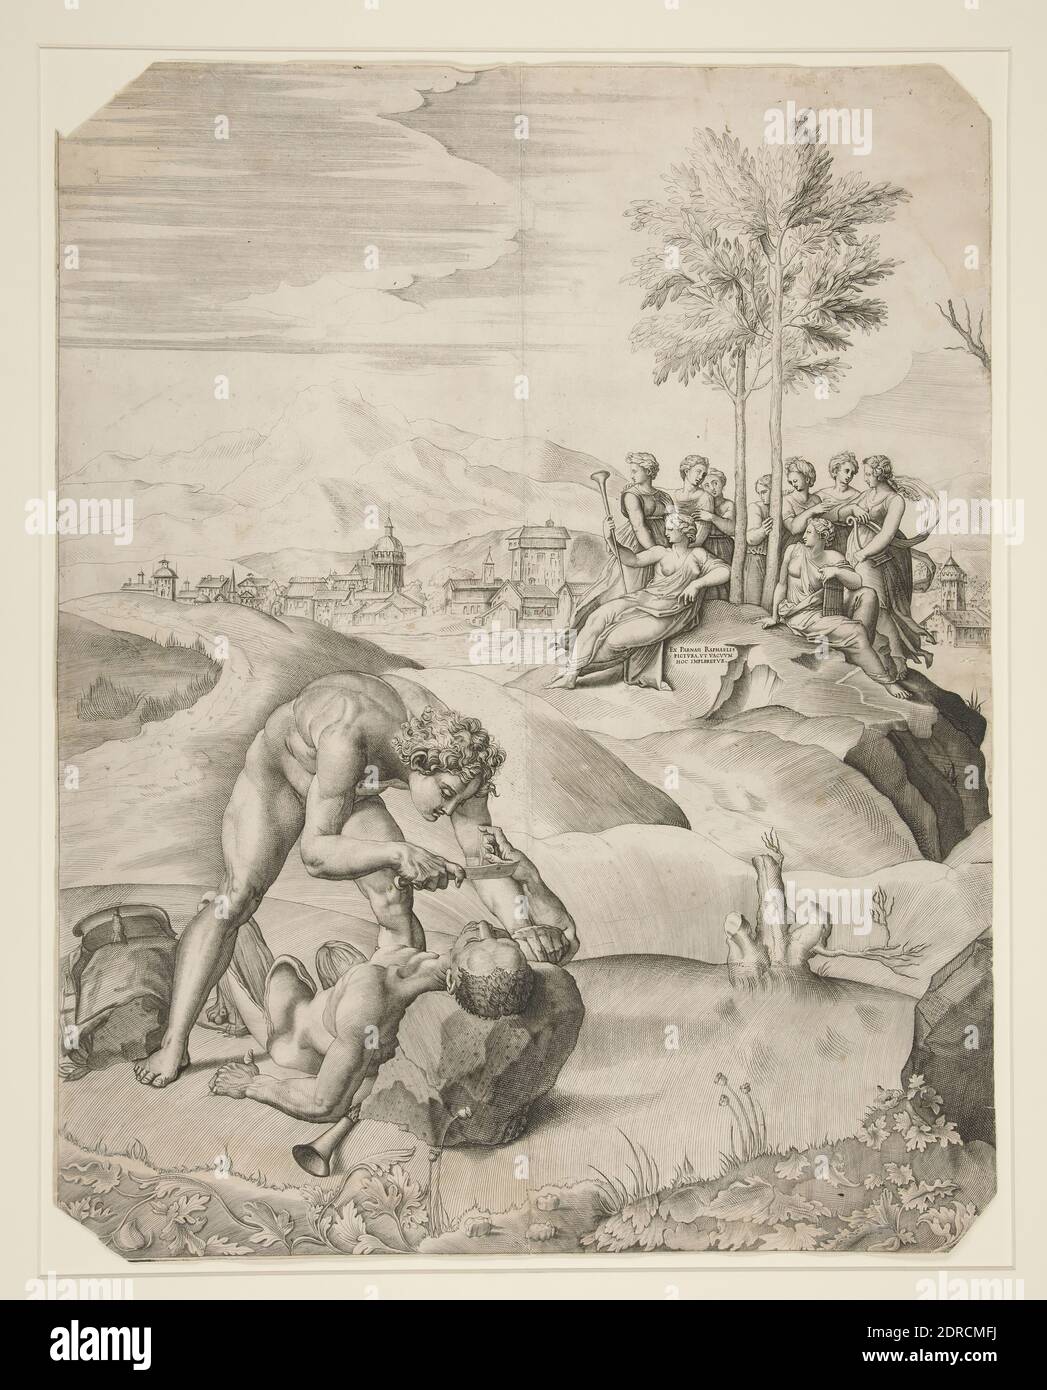 Artist: Giulio Sanuto, Italian, active in Venice 1540–1580, Flaying of Marsyas, Engraving, sheet: 52.3 × 41 cm (20 9/16 × 16 1/8 in.), Made in Italy, Italian, 16th century, Works on Paper - Prints Stock Photo